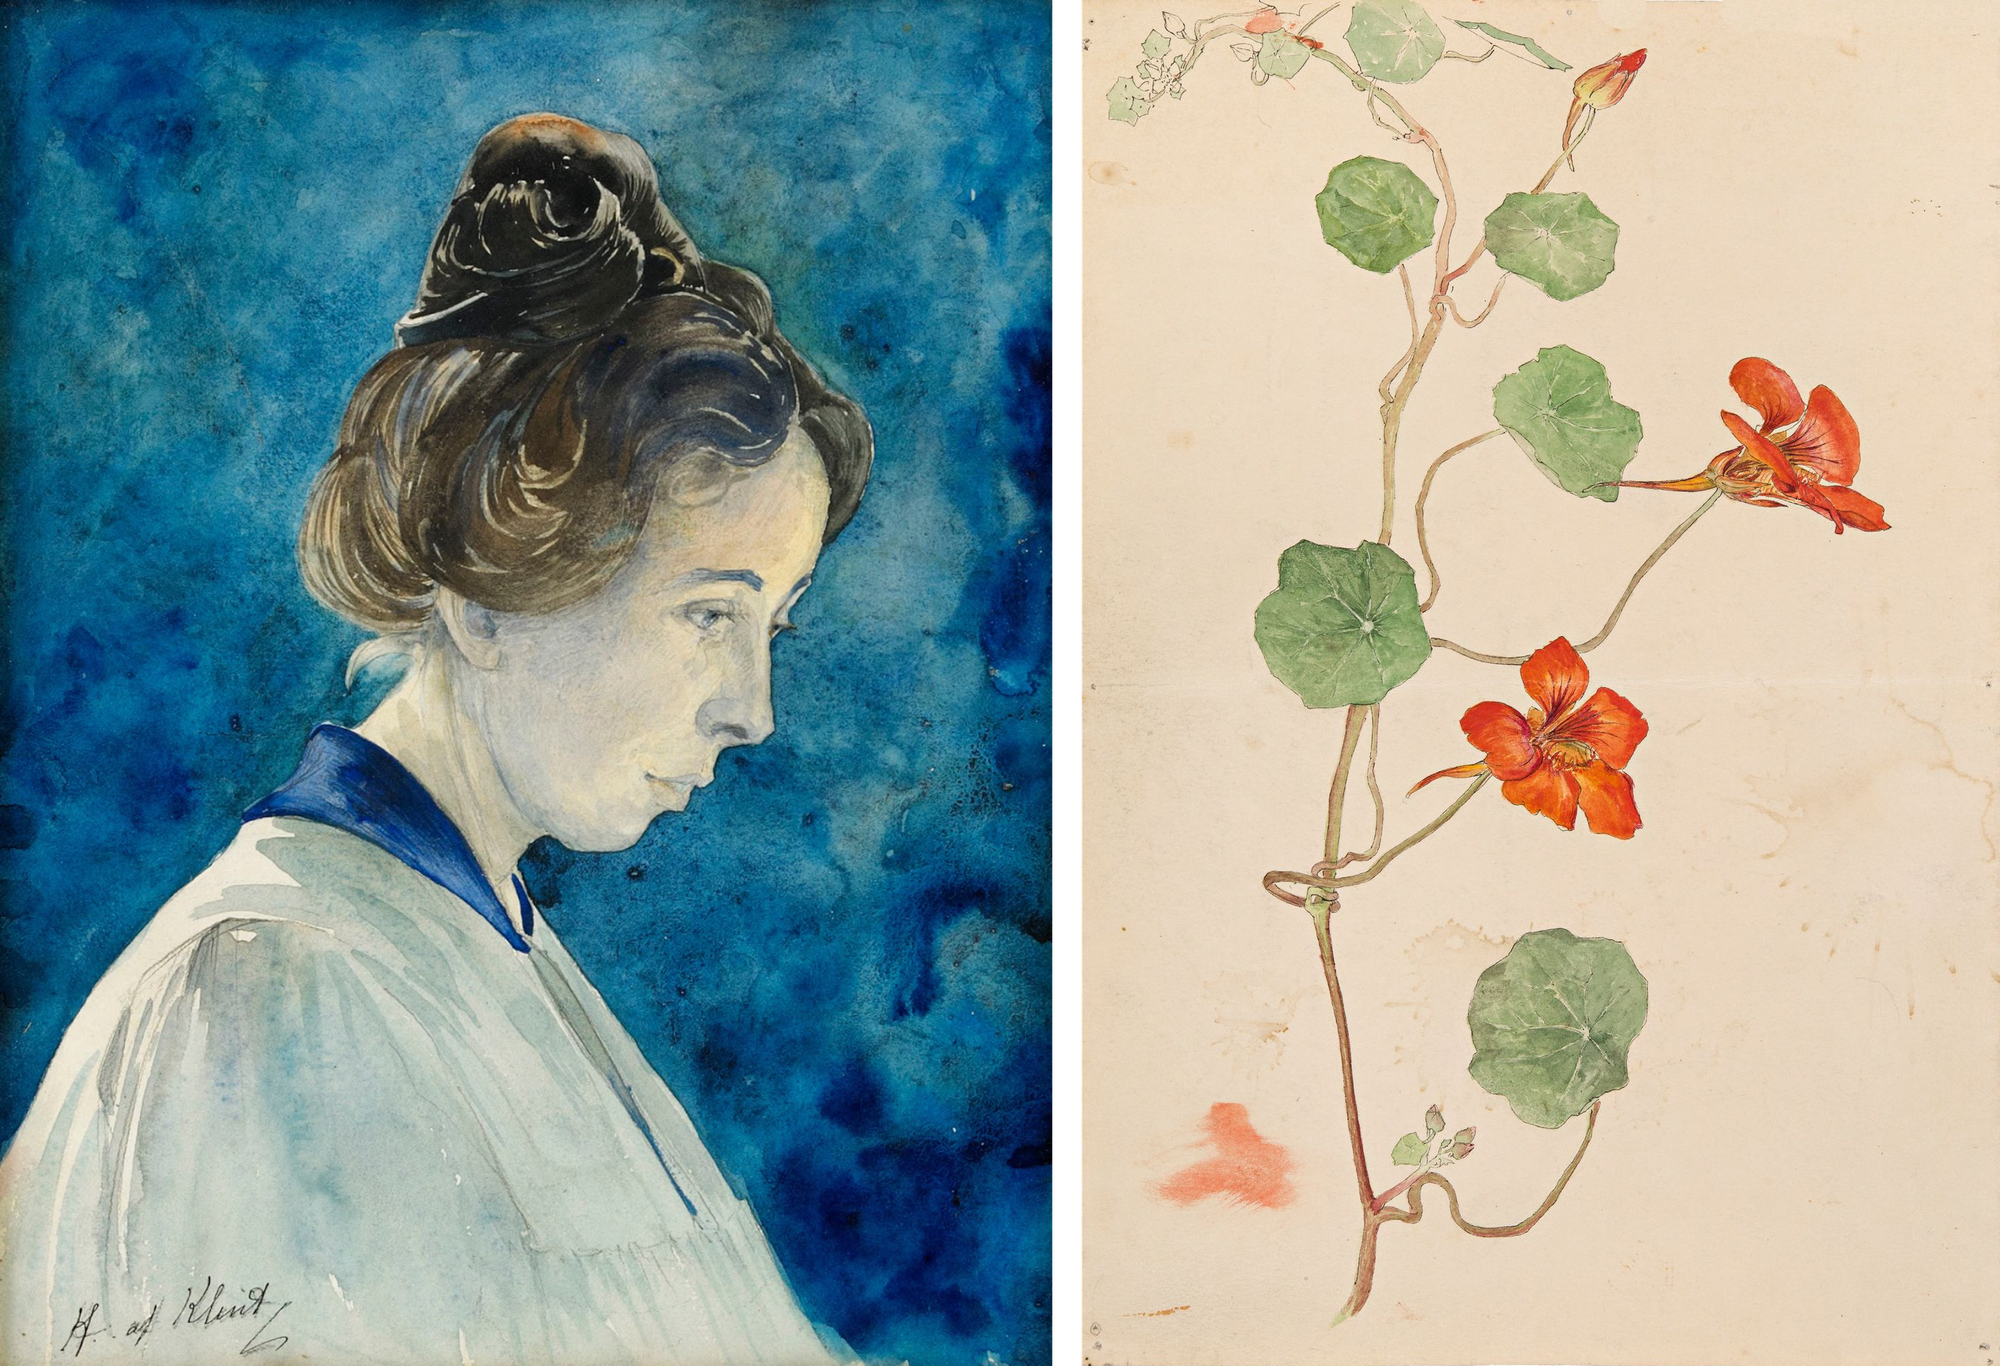 On left, Self-portrait painting of Hilma af Klint, right side to the camera, looking down to the right, hair up, wearing white in front of a blue background; on right, green and red flowers ascending on a slim stalk at left against a beige background